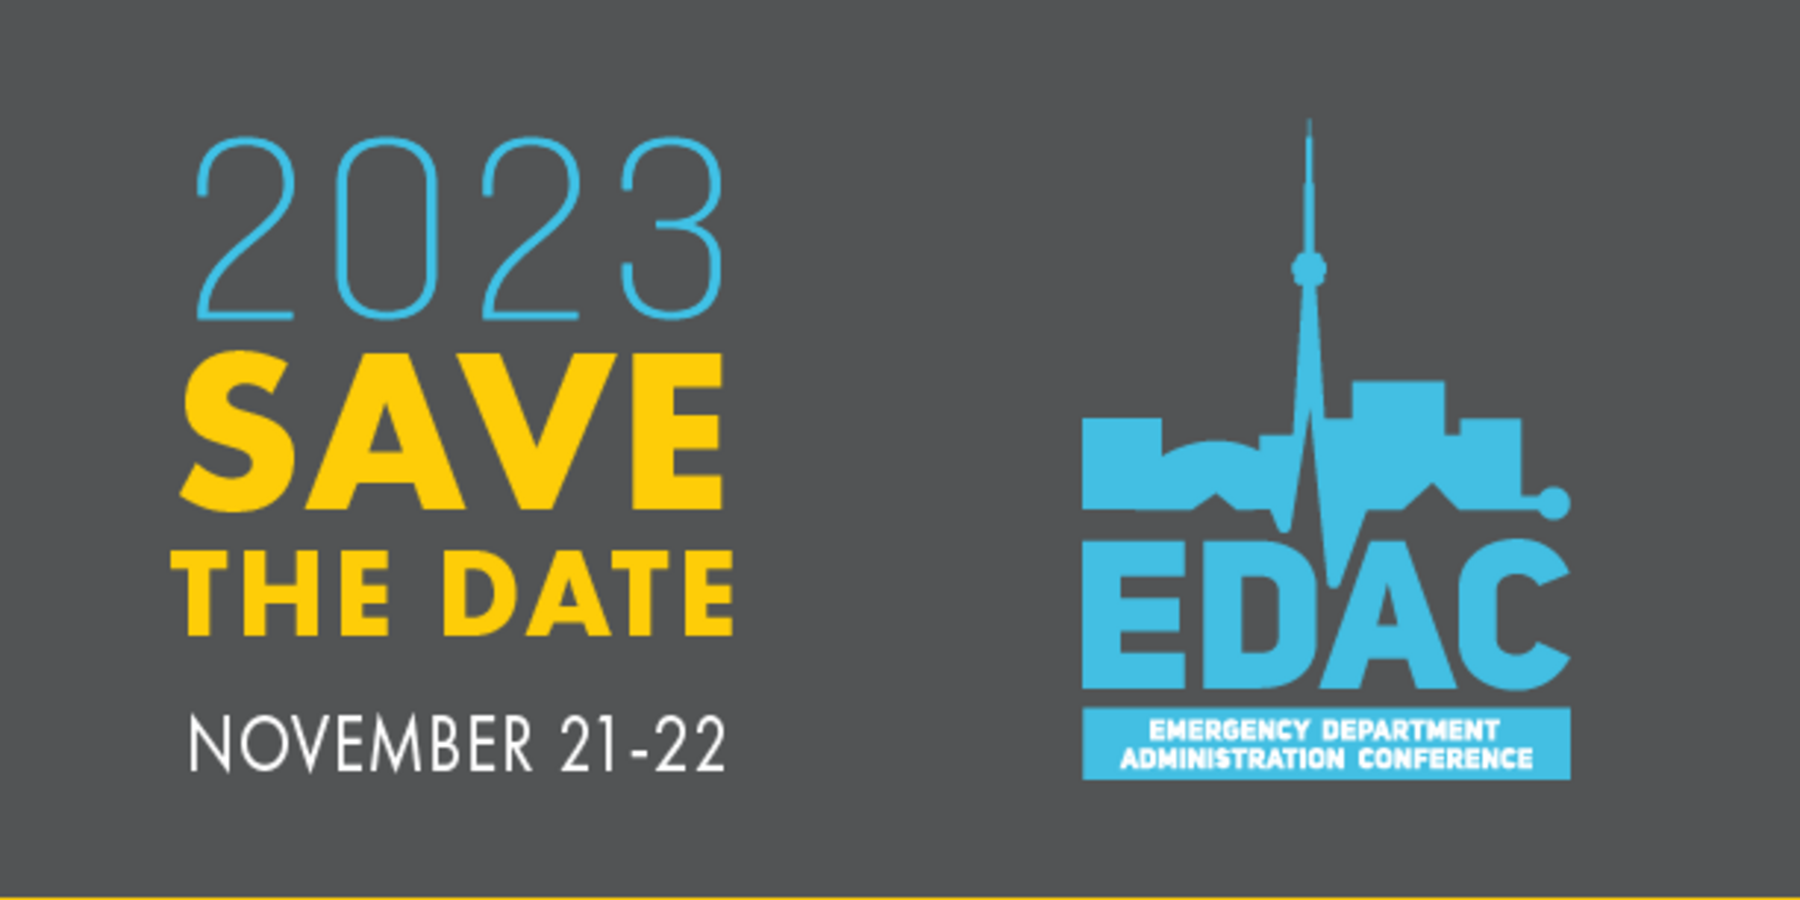 EDAC save the date for 2023. November 21 to 22